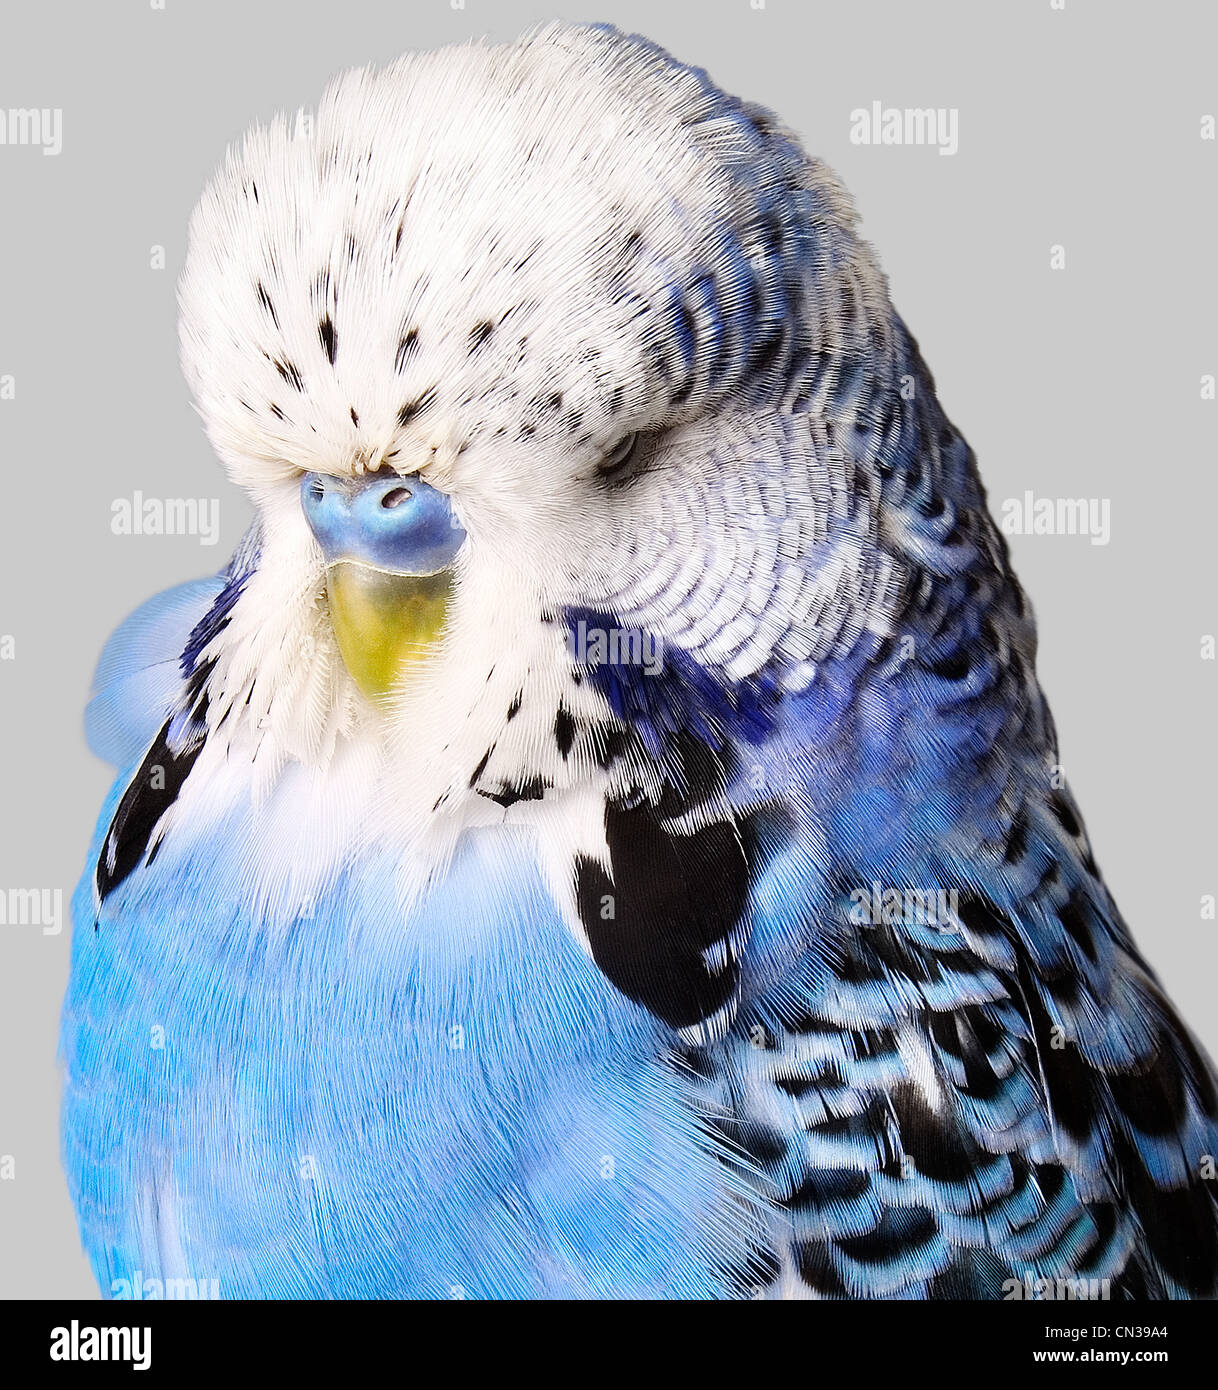 Budgerigar with blue and white feathers Stock Photo